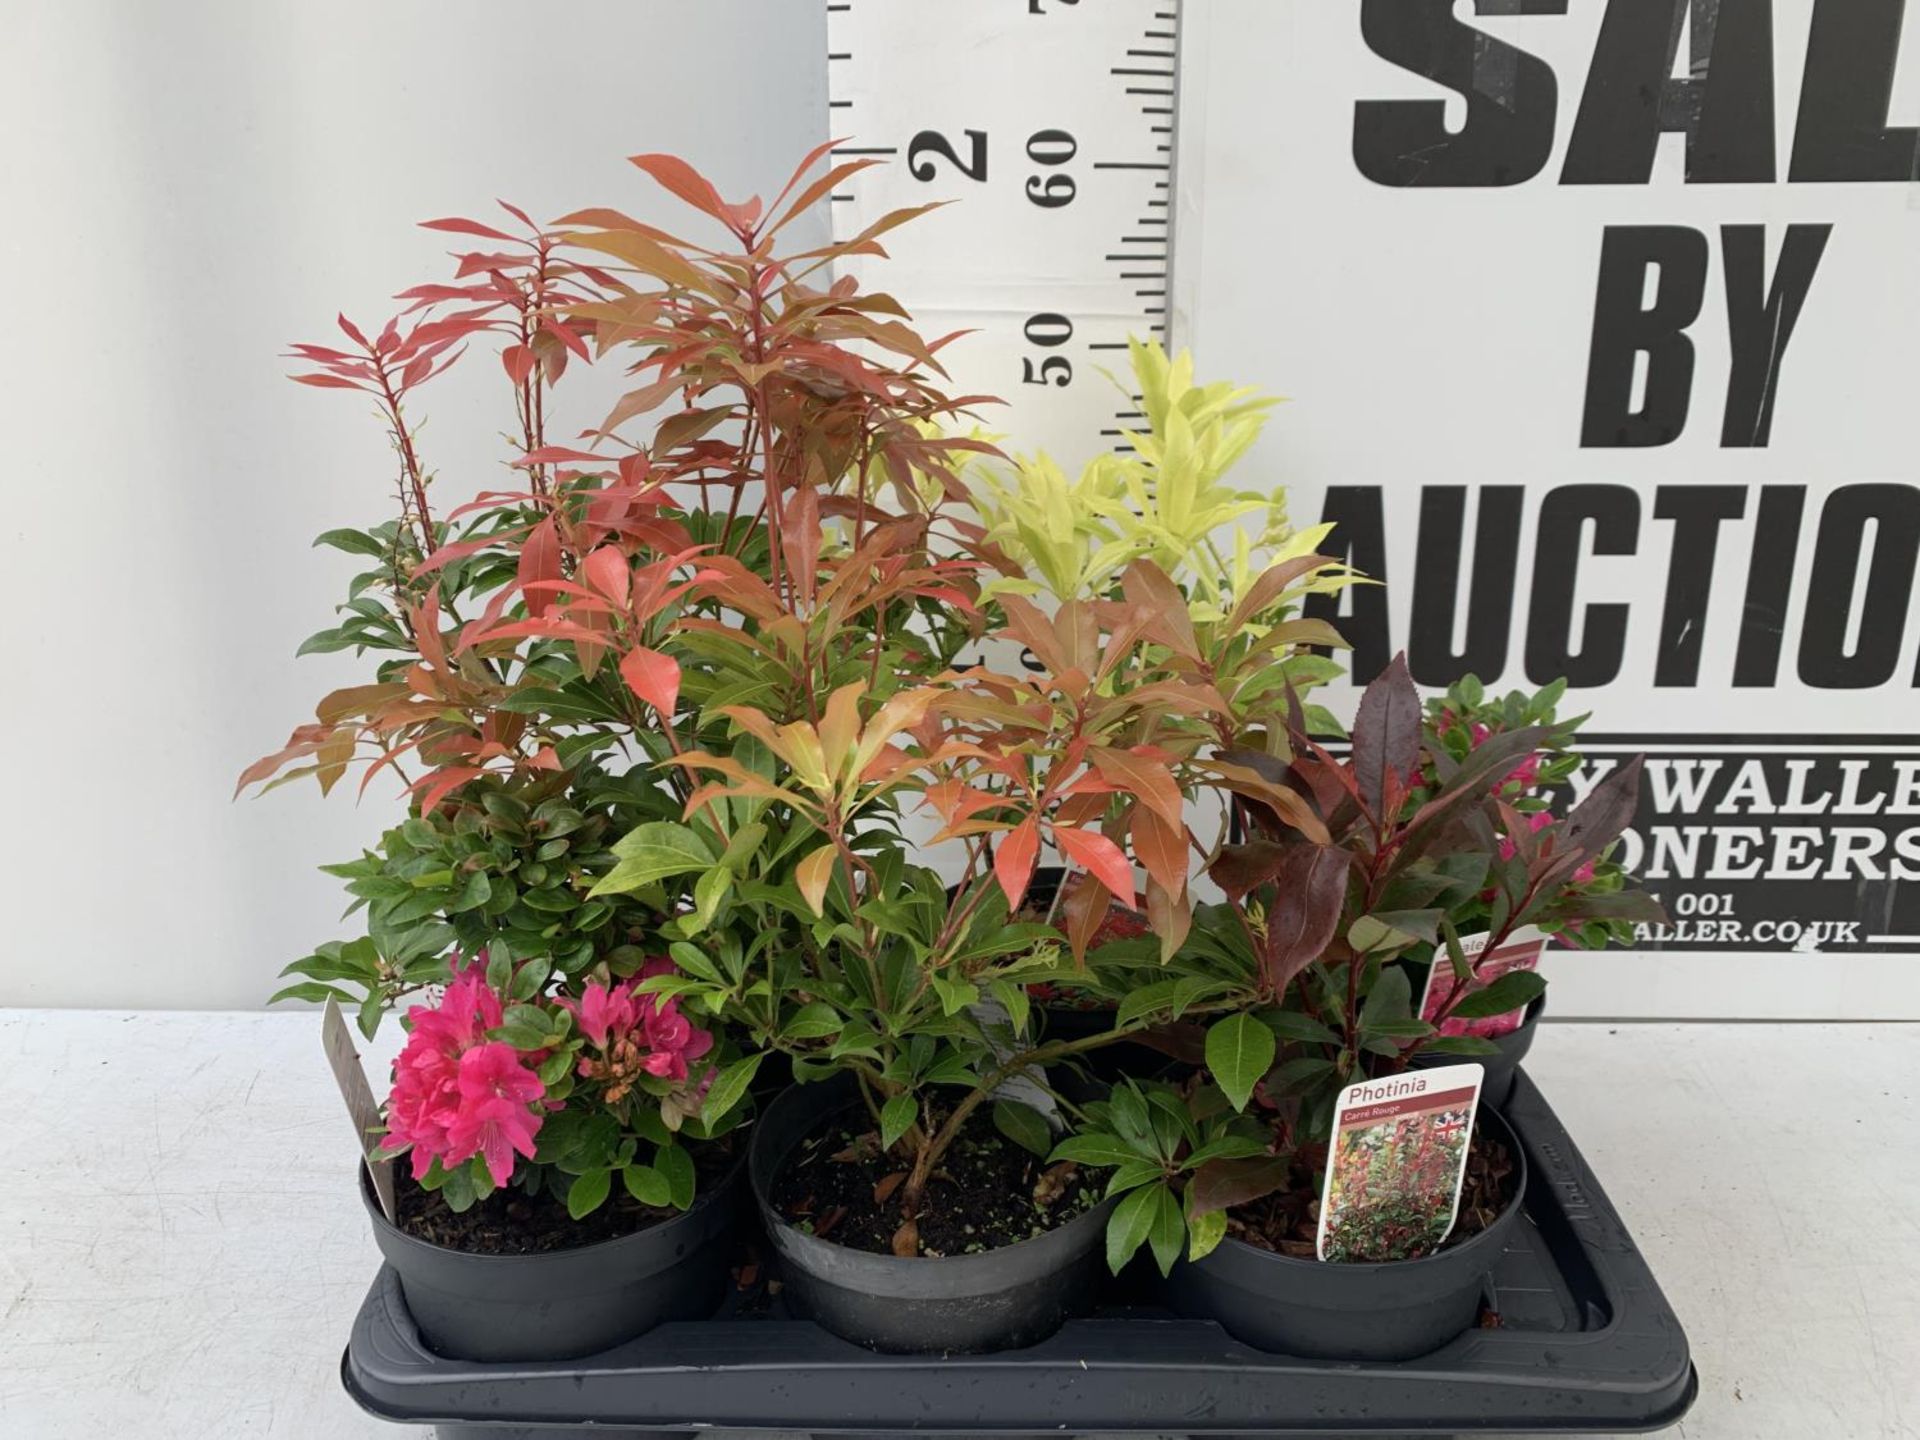 SIX MIXED SHRUBS IN 2 LTR POTS TO INCLUDE PHOTINIA, AZALEAS, PIERIS ETC APPROX 50CM IN HEIGHT PLUS